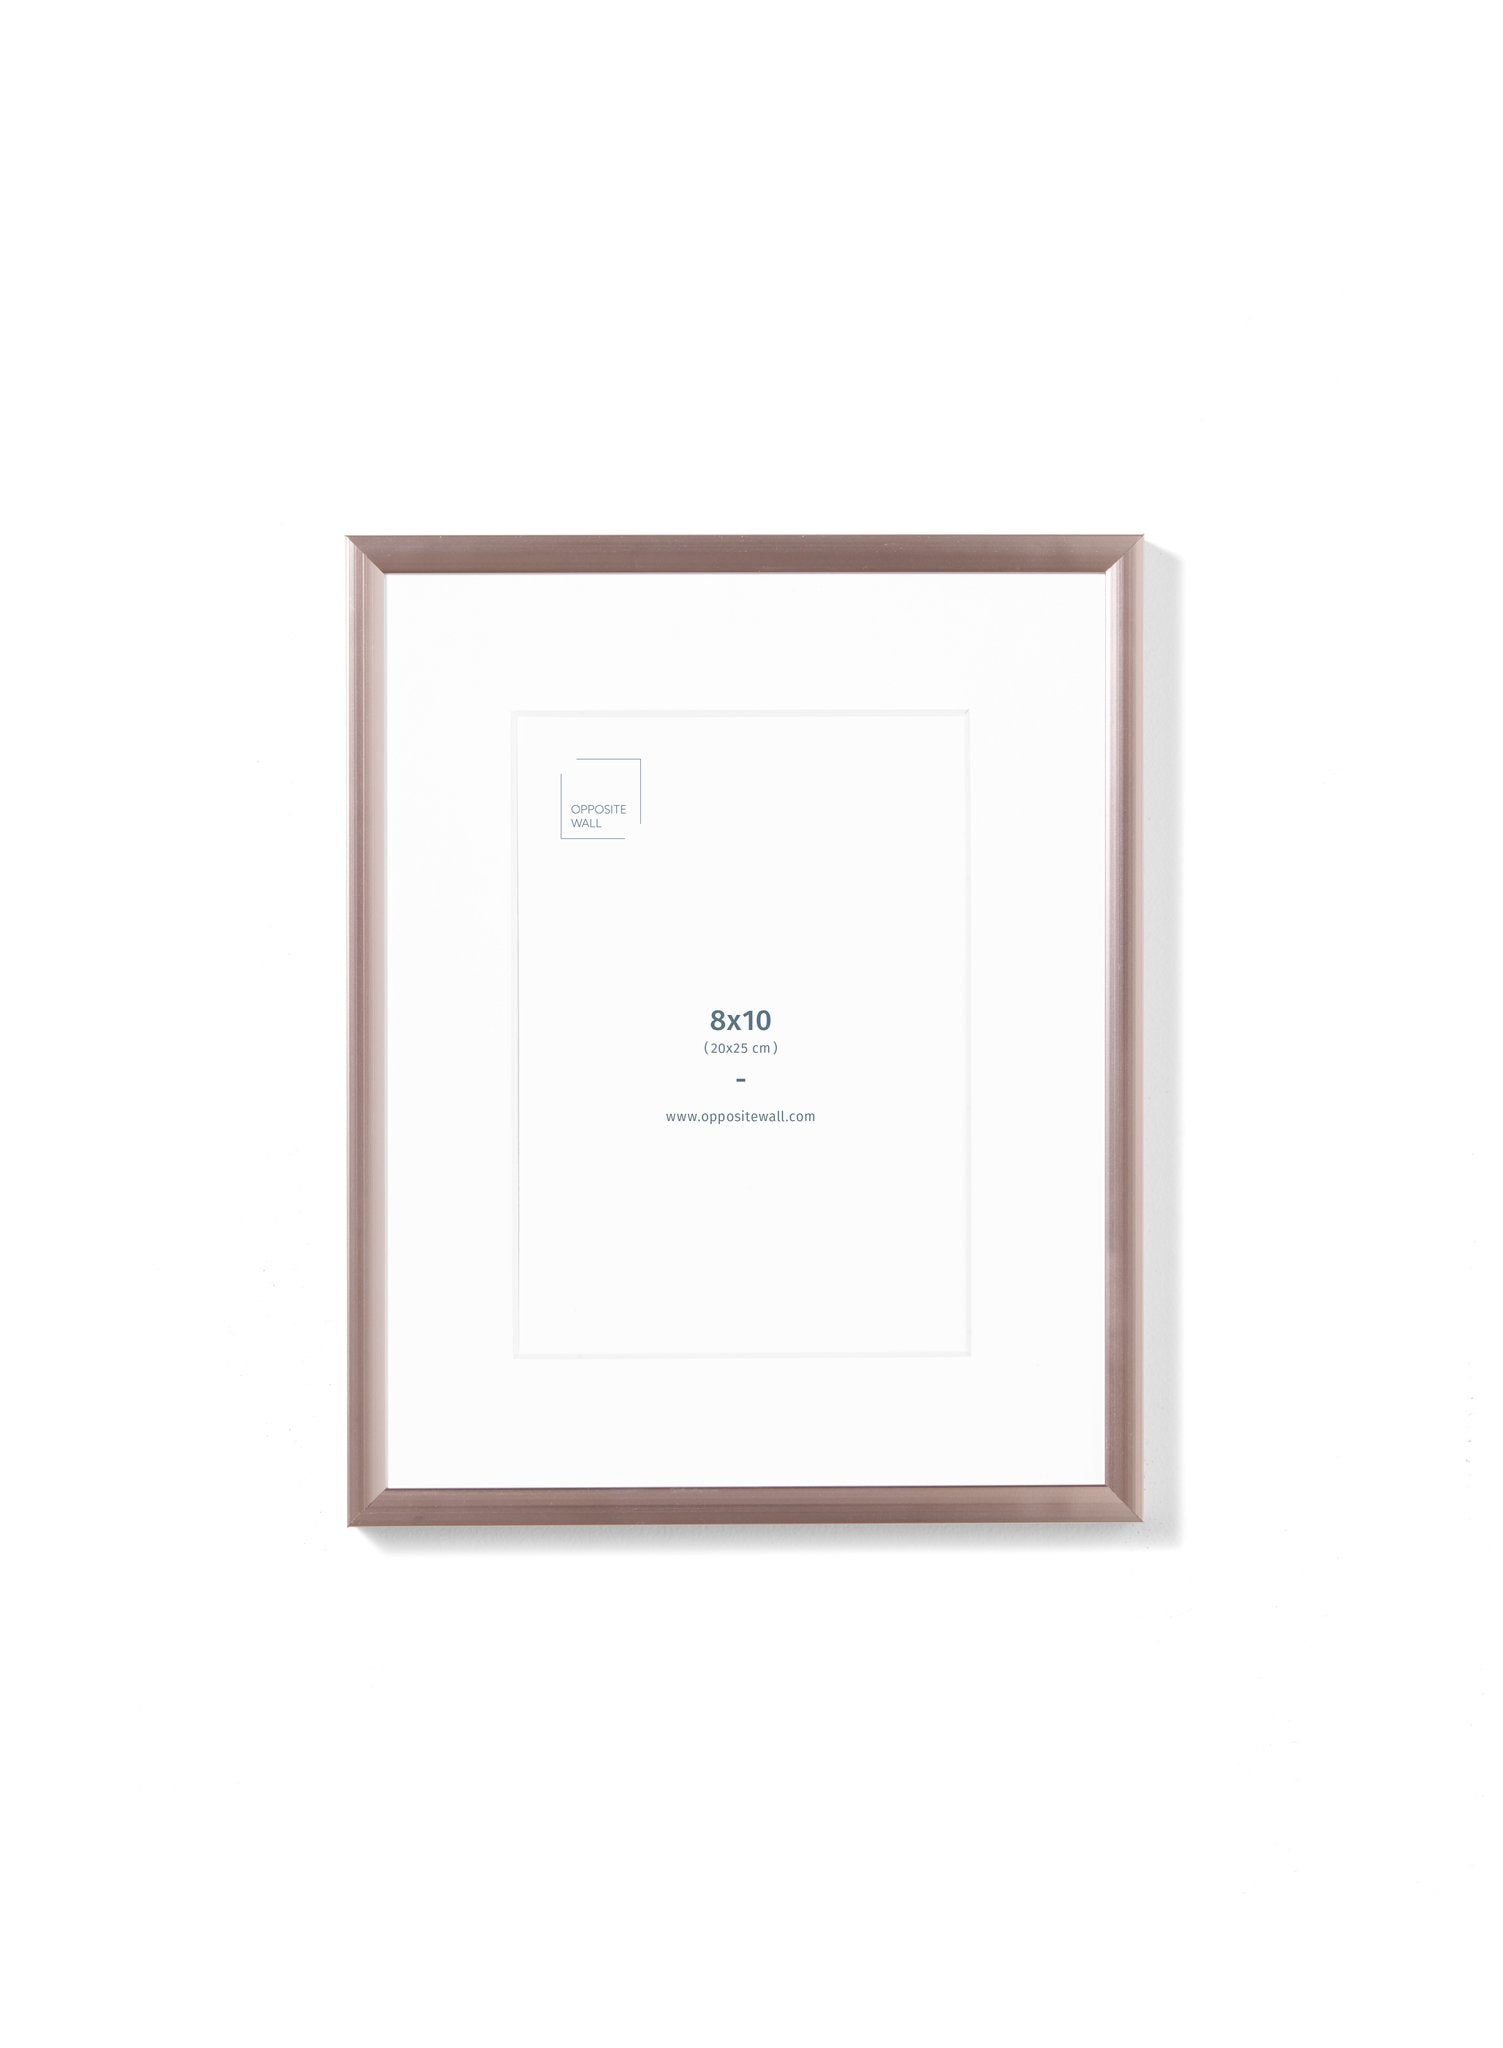 Scandinavian rose gold aluminum metal frame by Opposite Wall - Front of the frame - Size 8x10